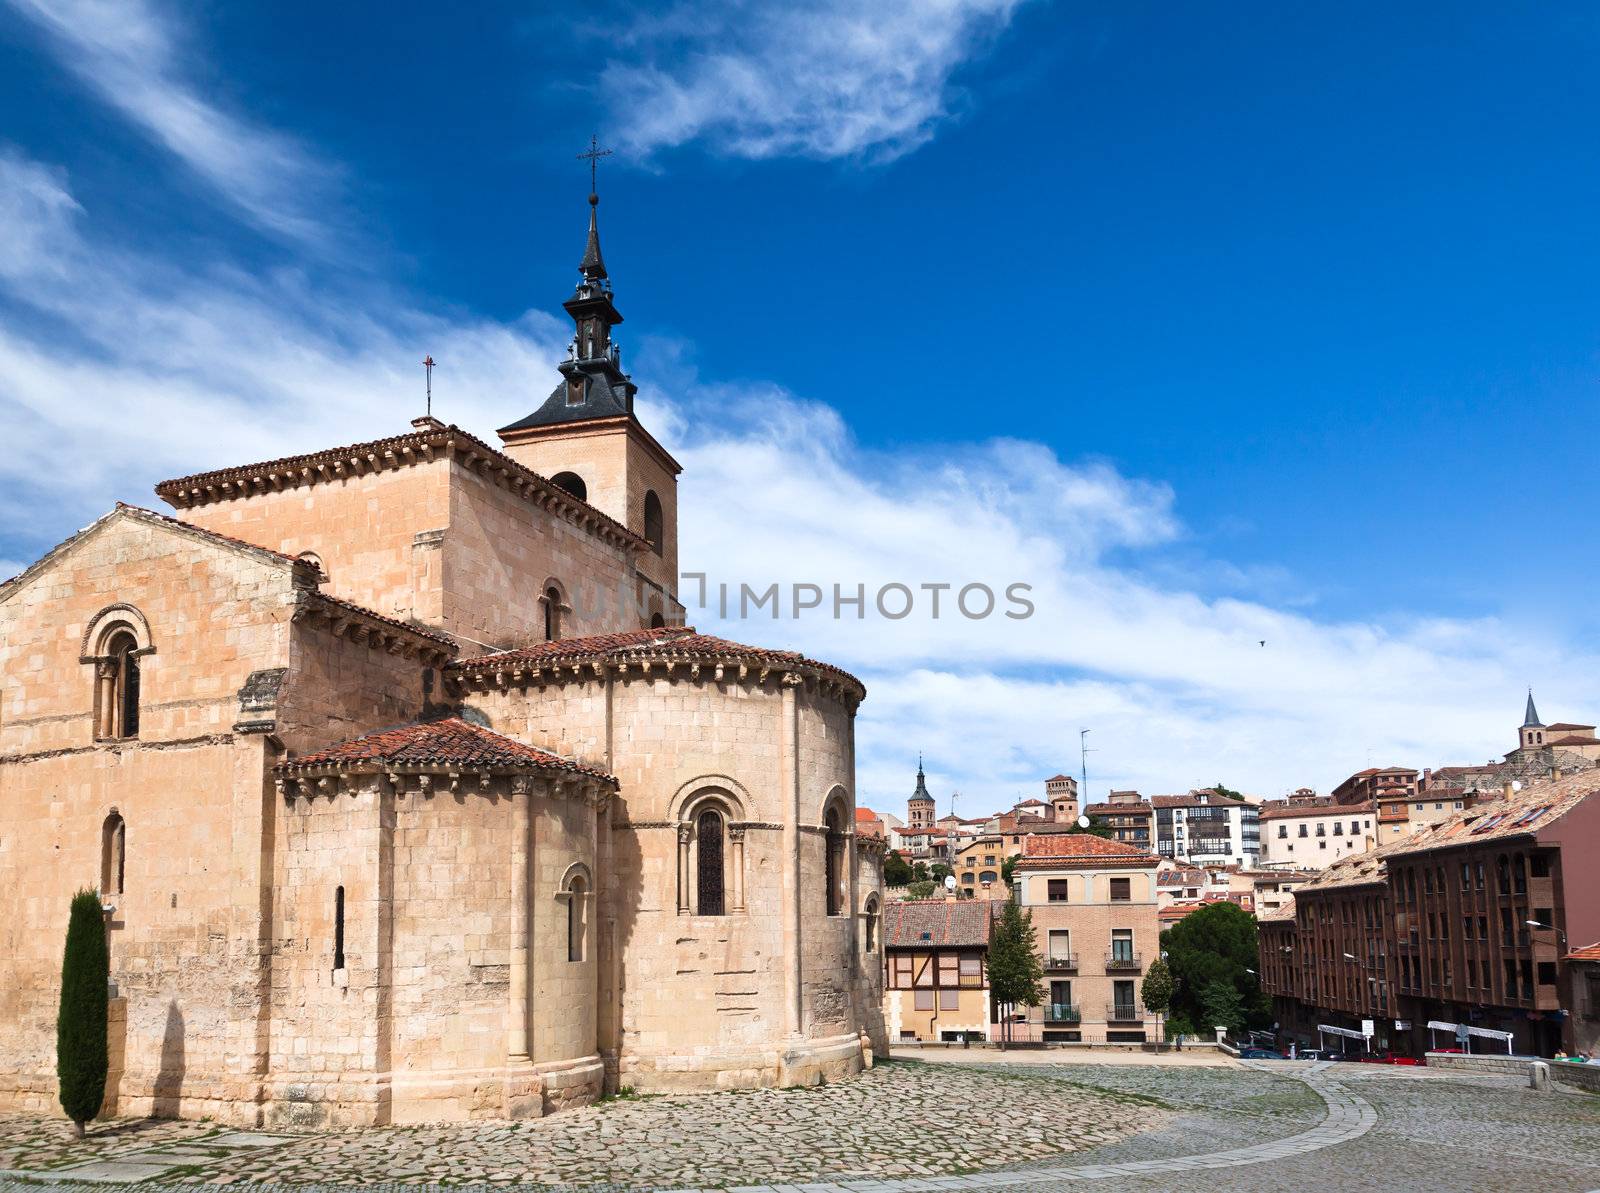 an ancient church in Segovia, World Heritage city, Spain